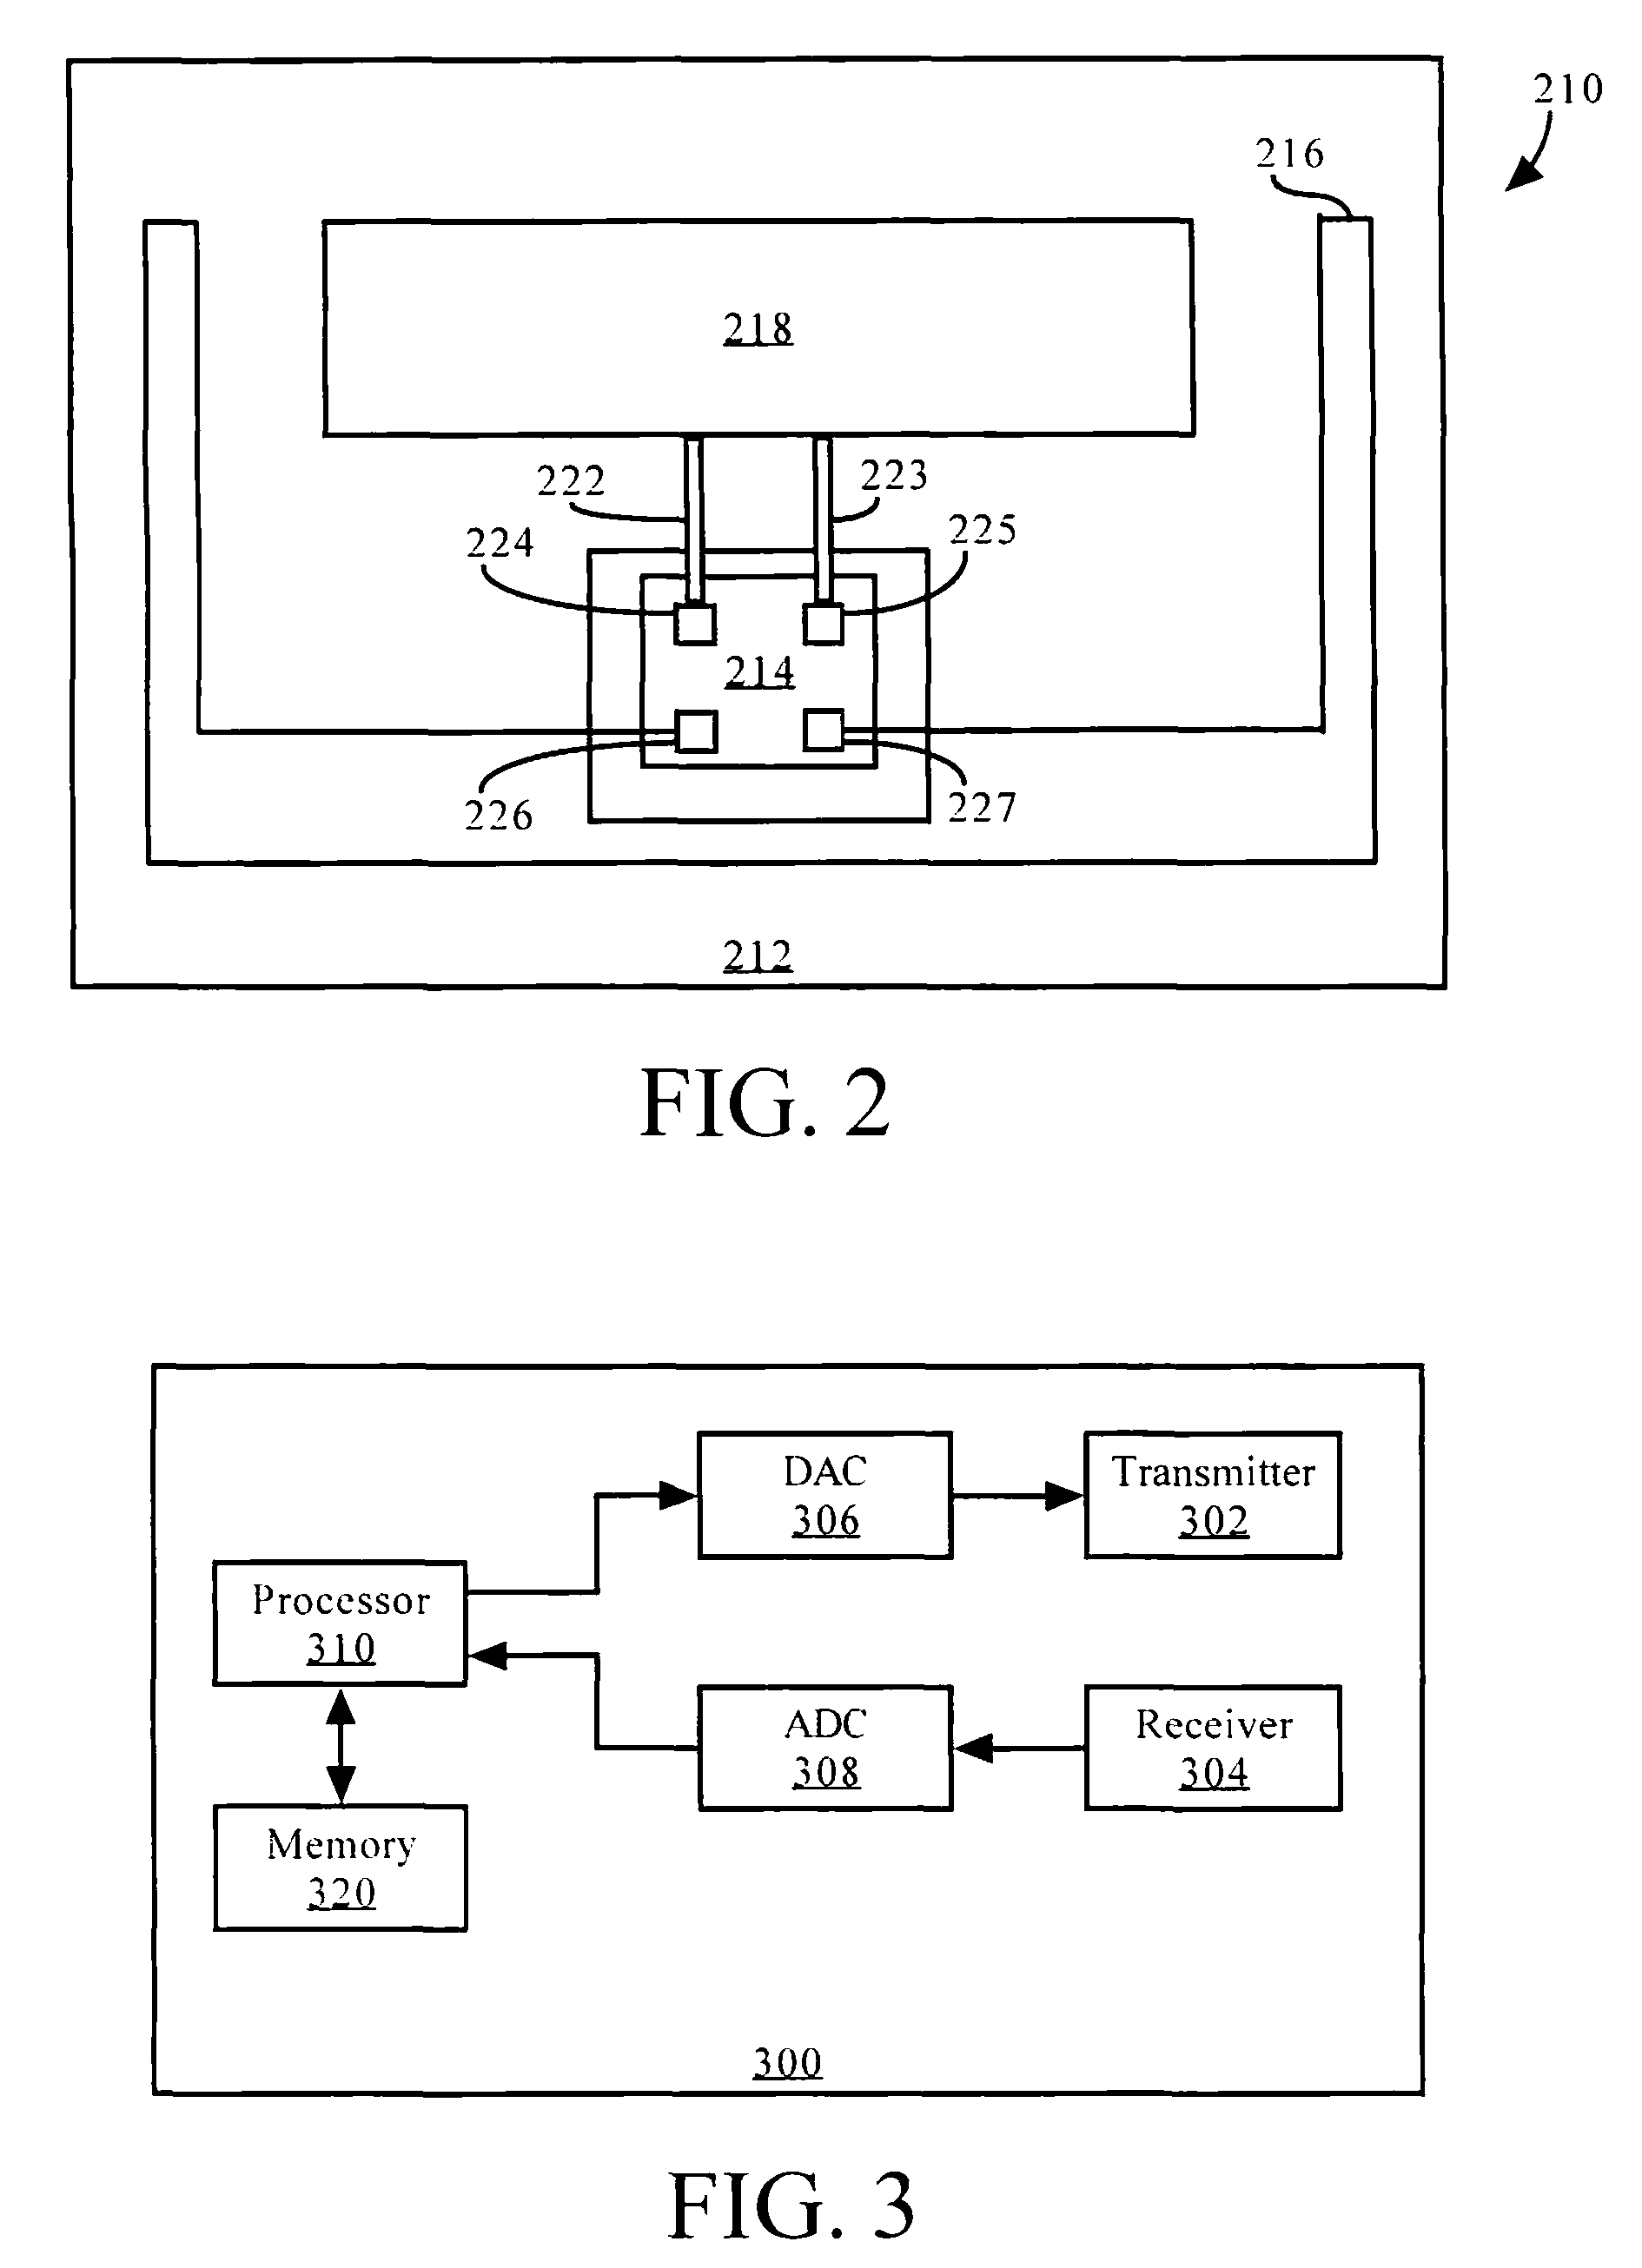 Apparatus and methods for tracking movement of persons